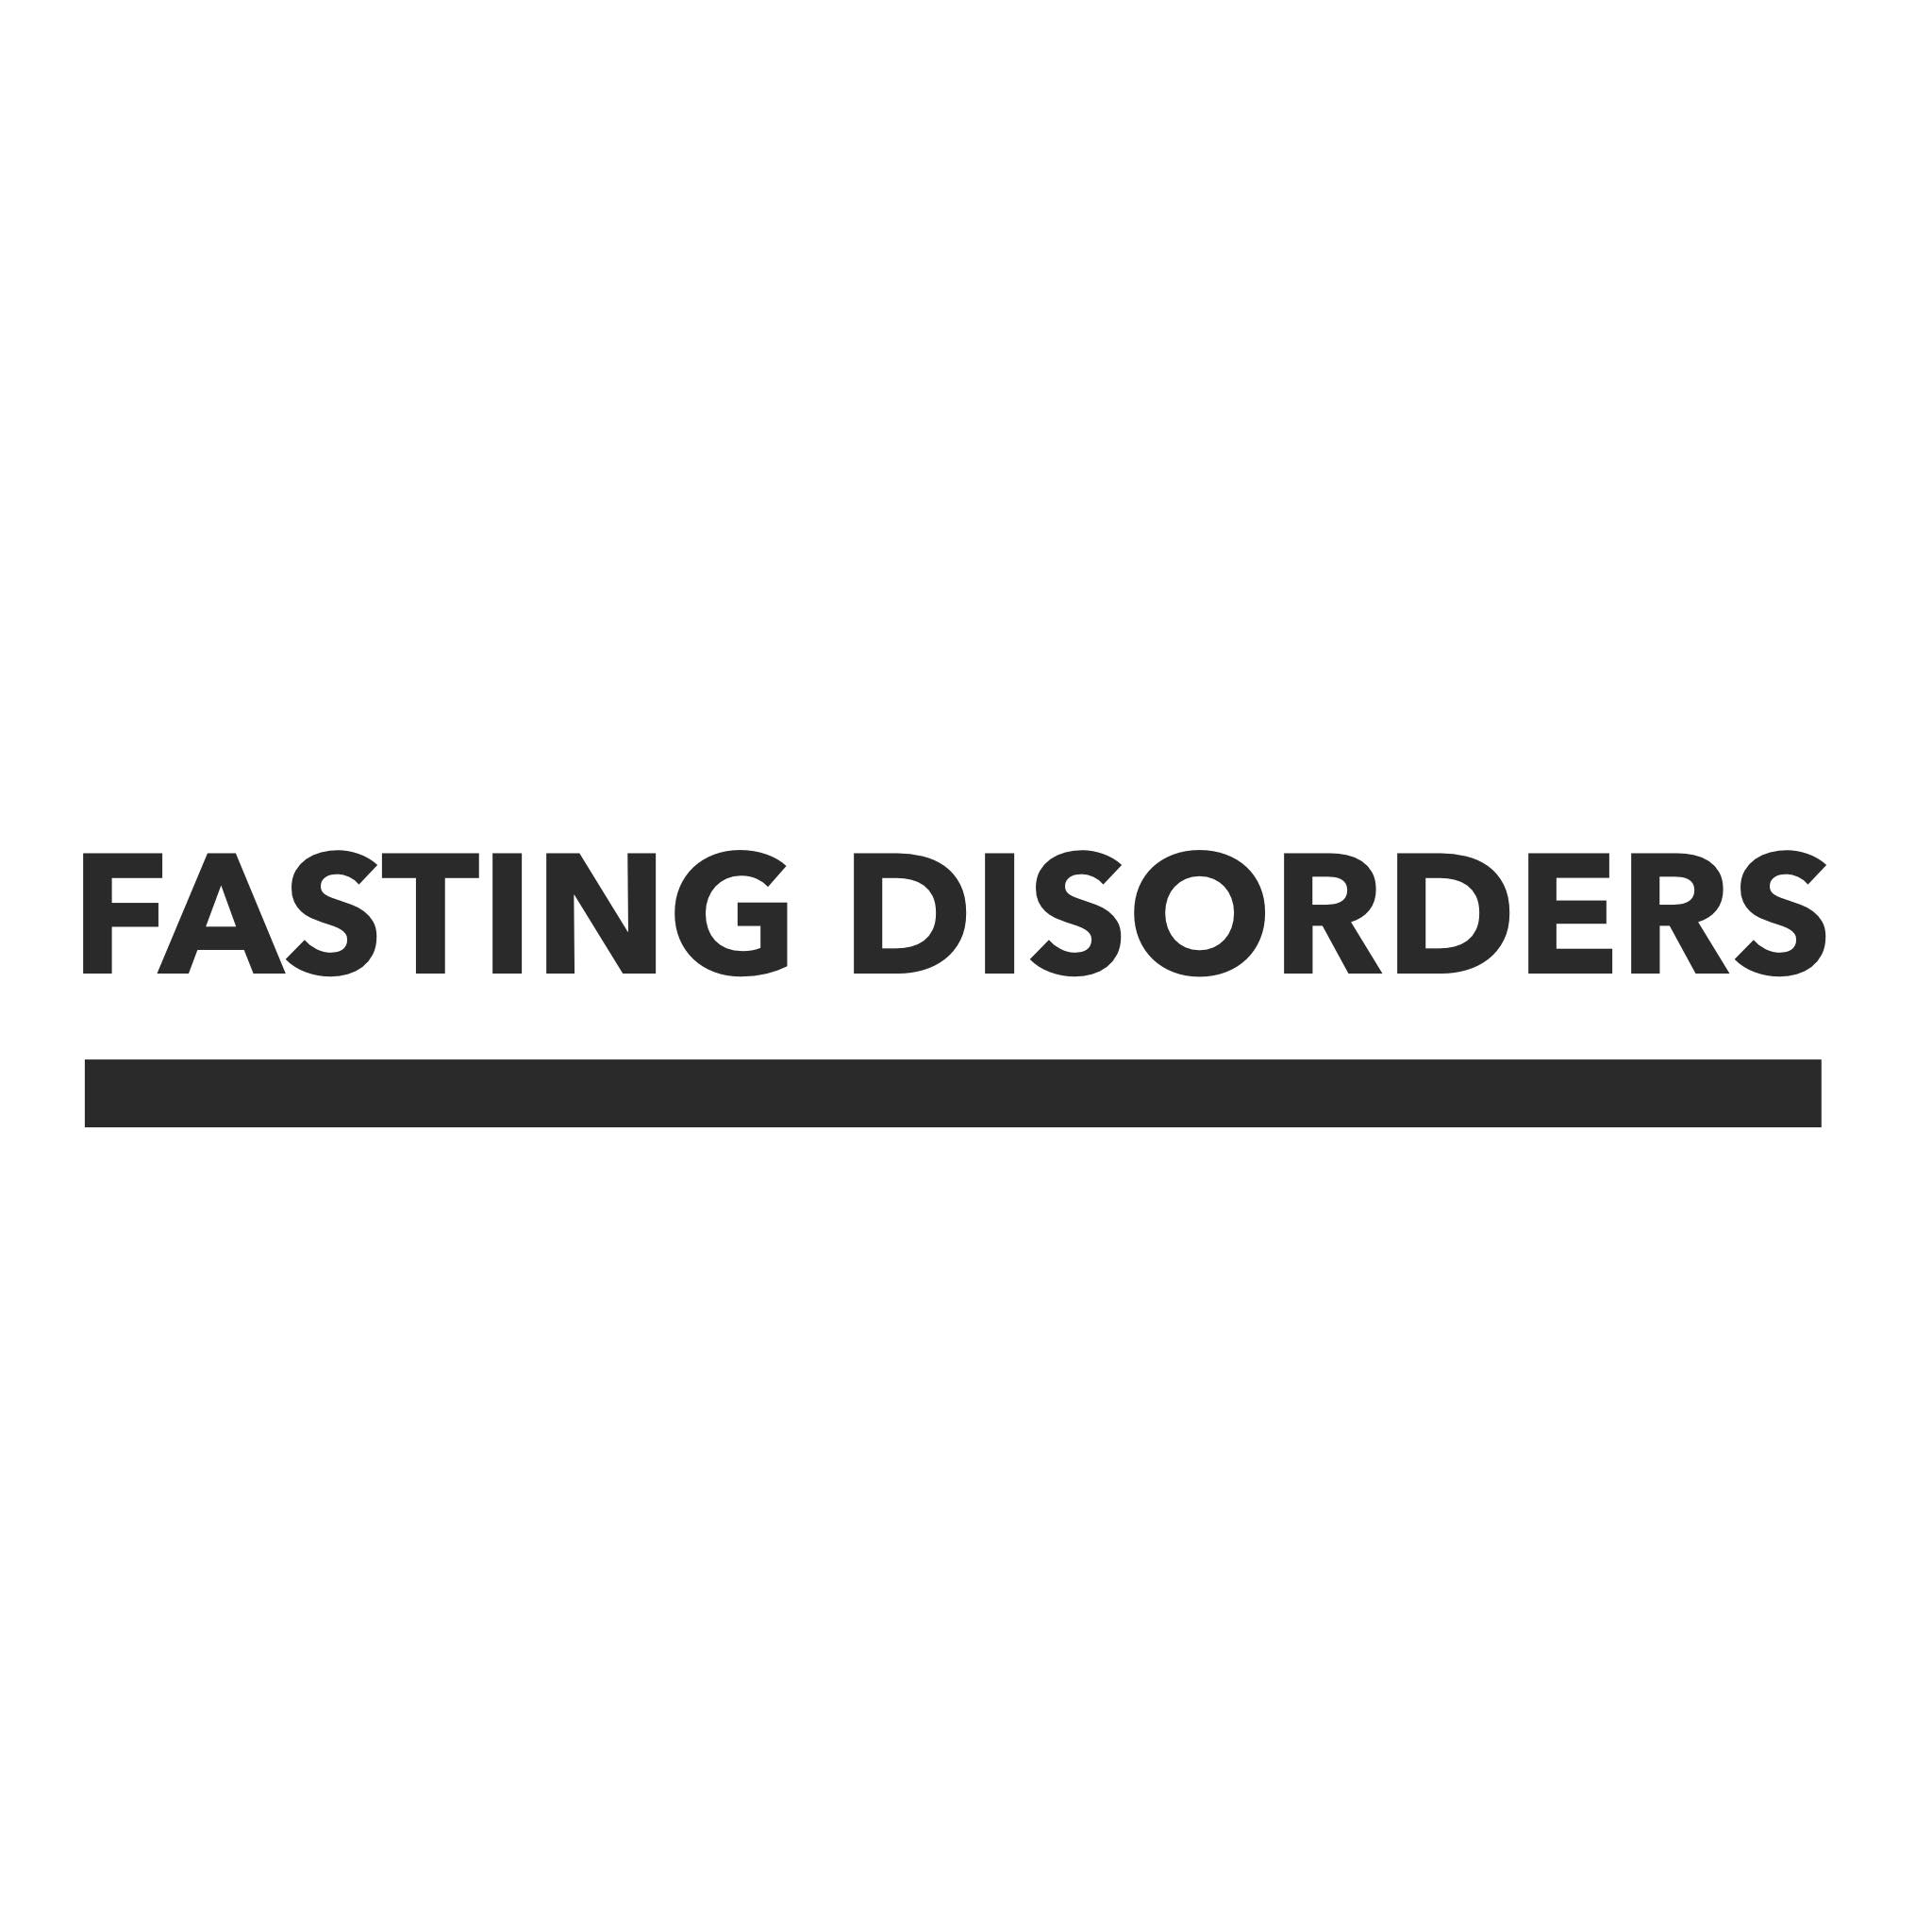 Fasting disorders